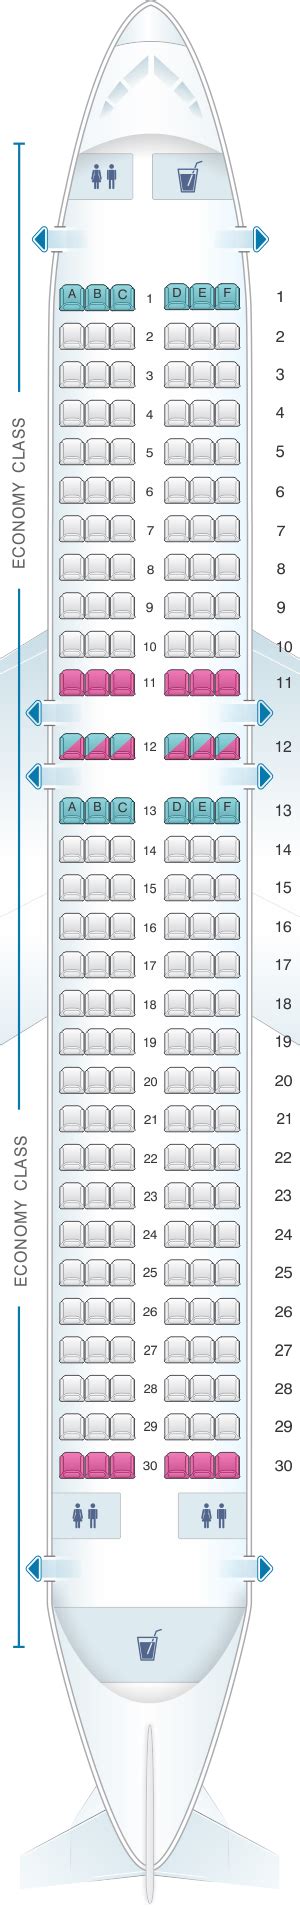 Seat Map Airbus A320